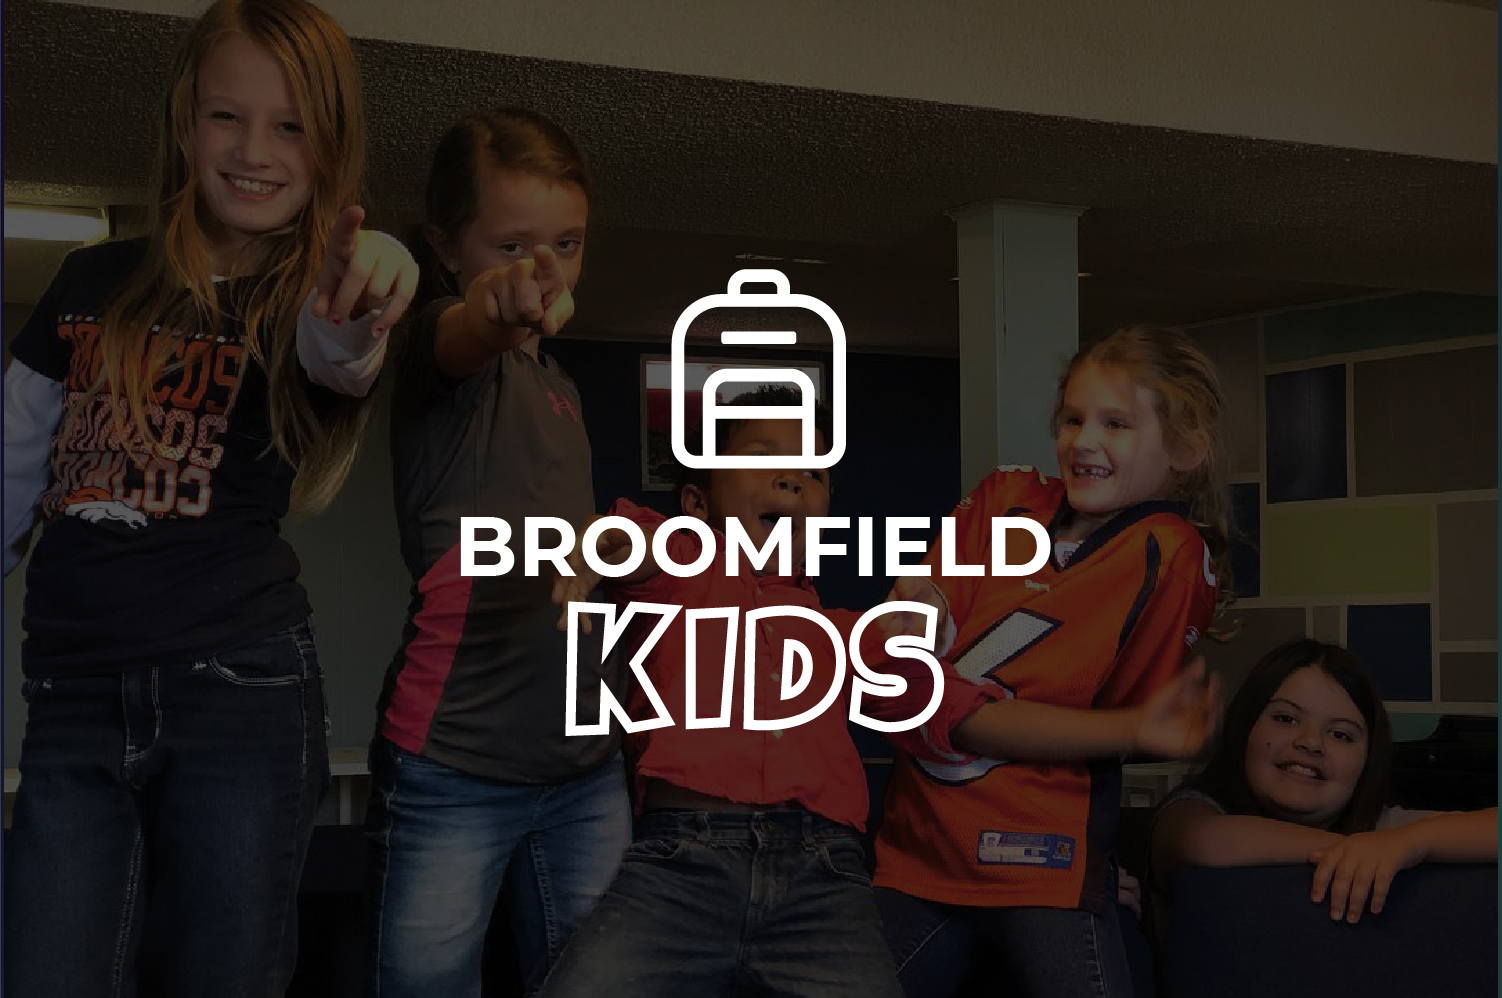 Here at Broomfield Kids we strive to make sure every child gets to experience Jesus on their level. We have safe, creative environments where kids can make friends, learn about Jesus and have fun!  It's not babysitting, it a place where kids can discover and grow in Jesus! 